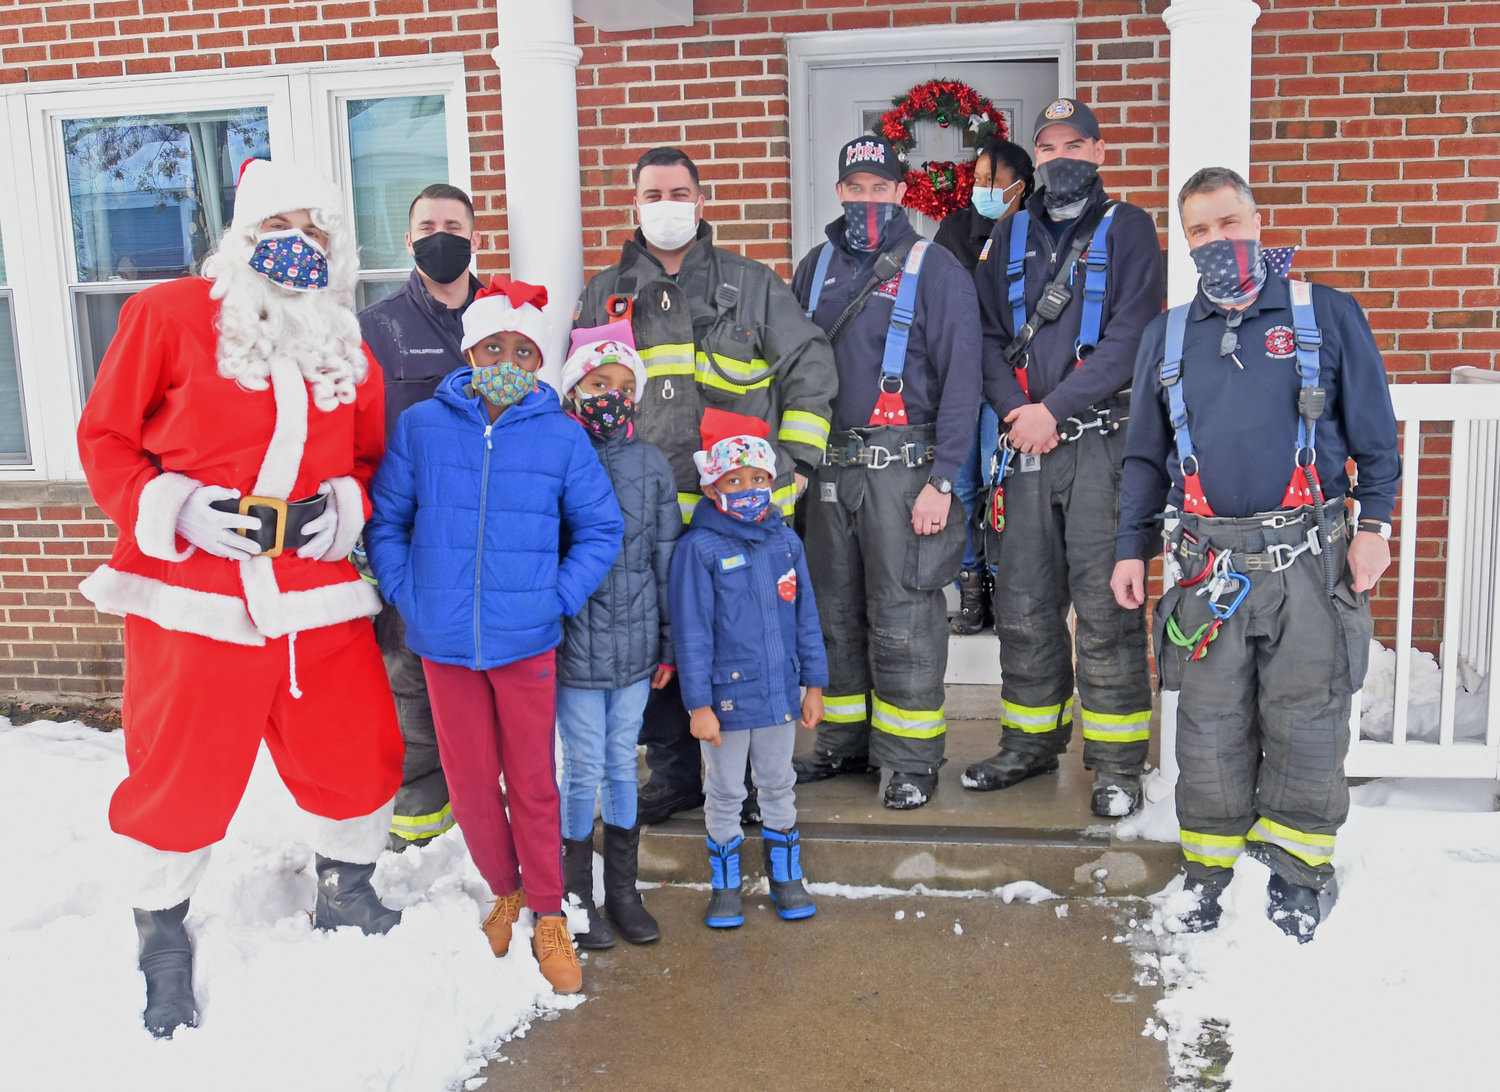 Rome FD firefighters with one of the four family of children that were given gifts by the RFD with funds donated by firemen Monday afternoon at Libery Gardens.